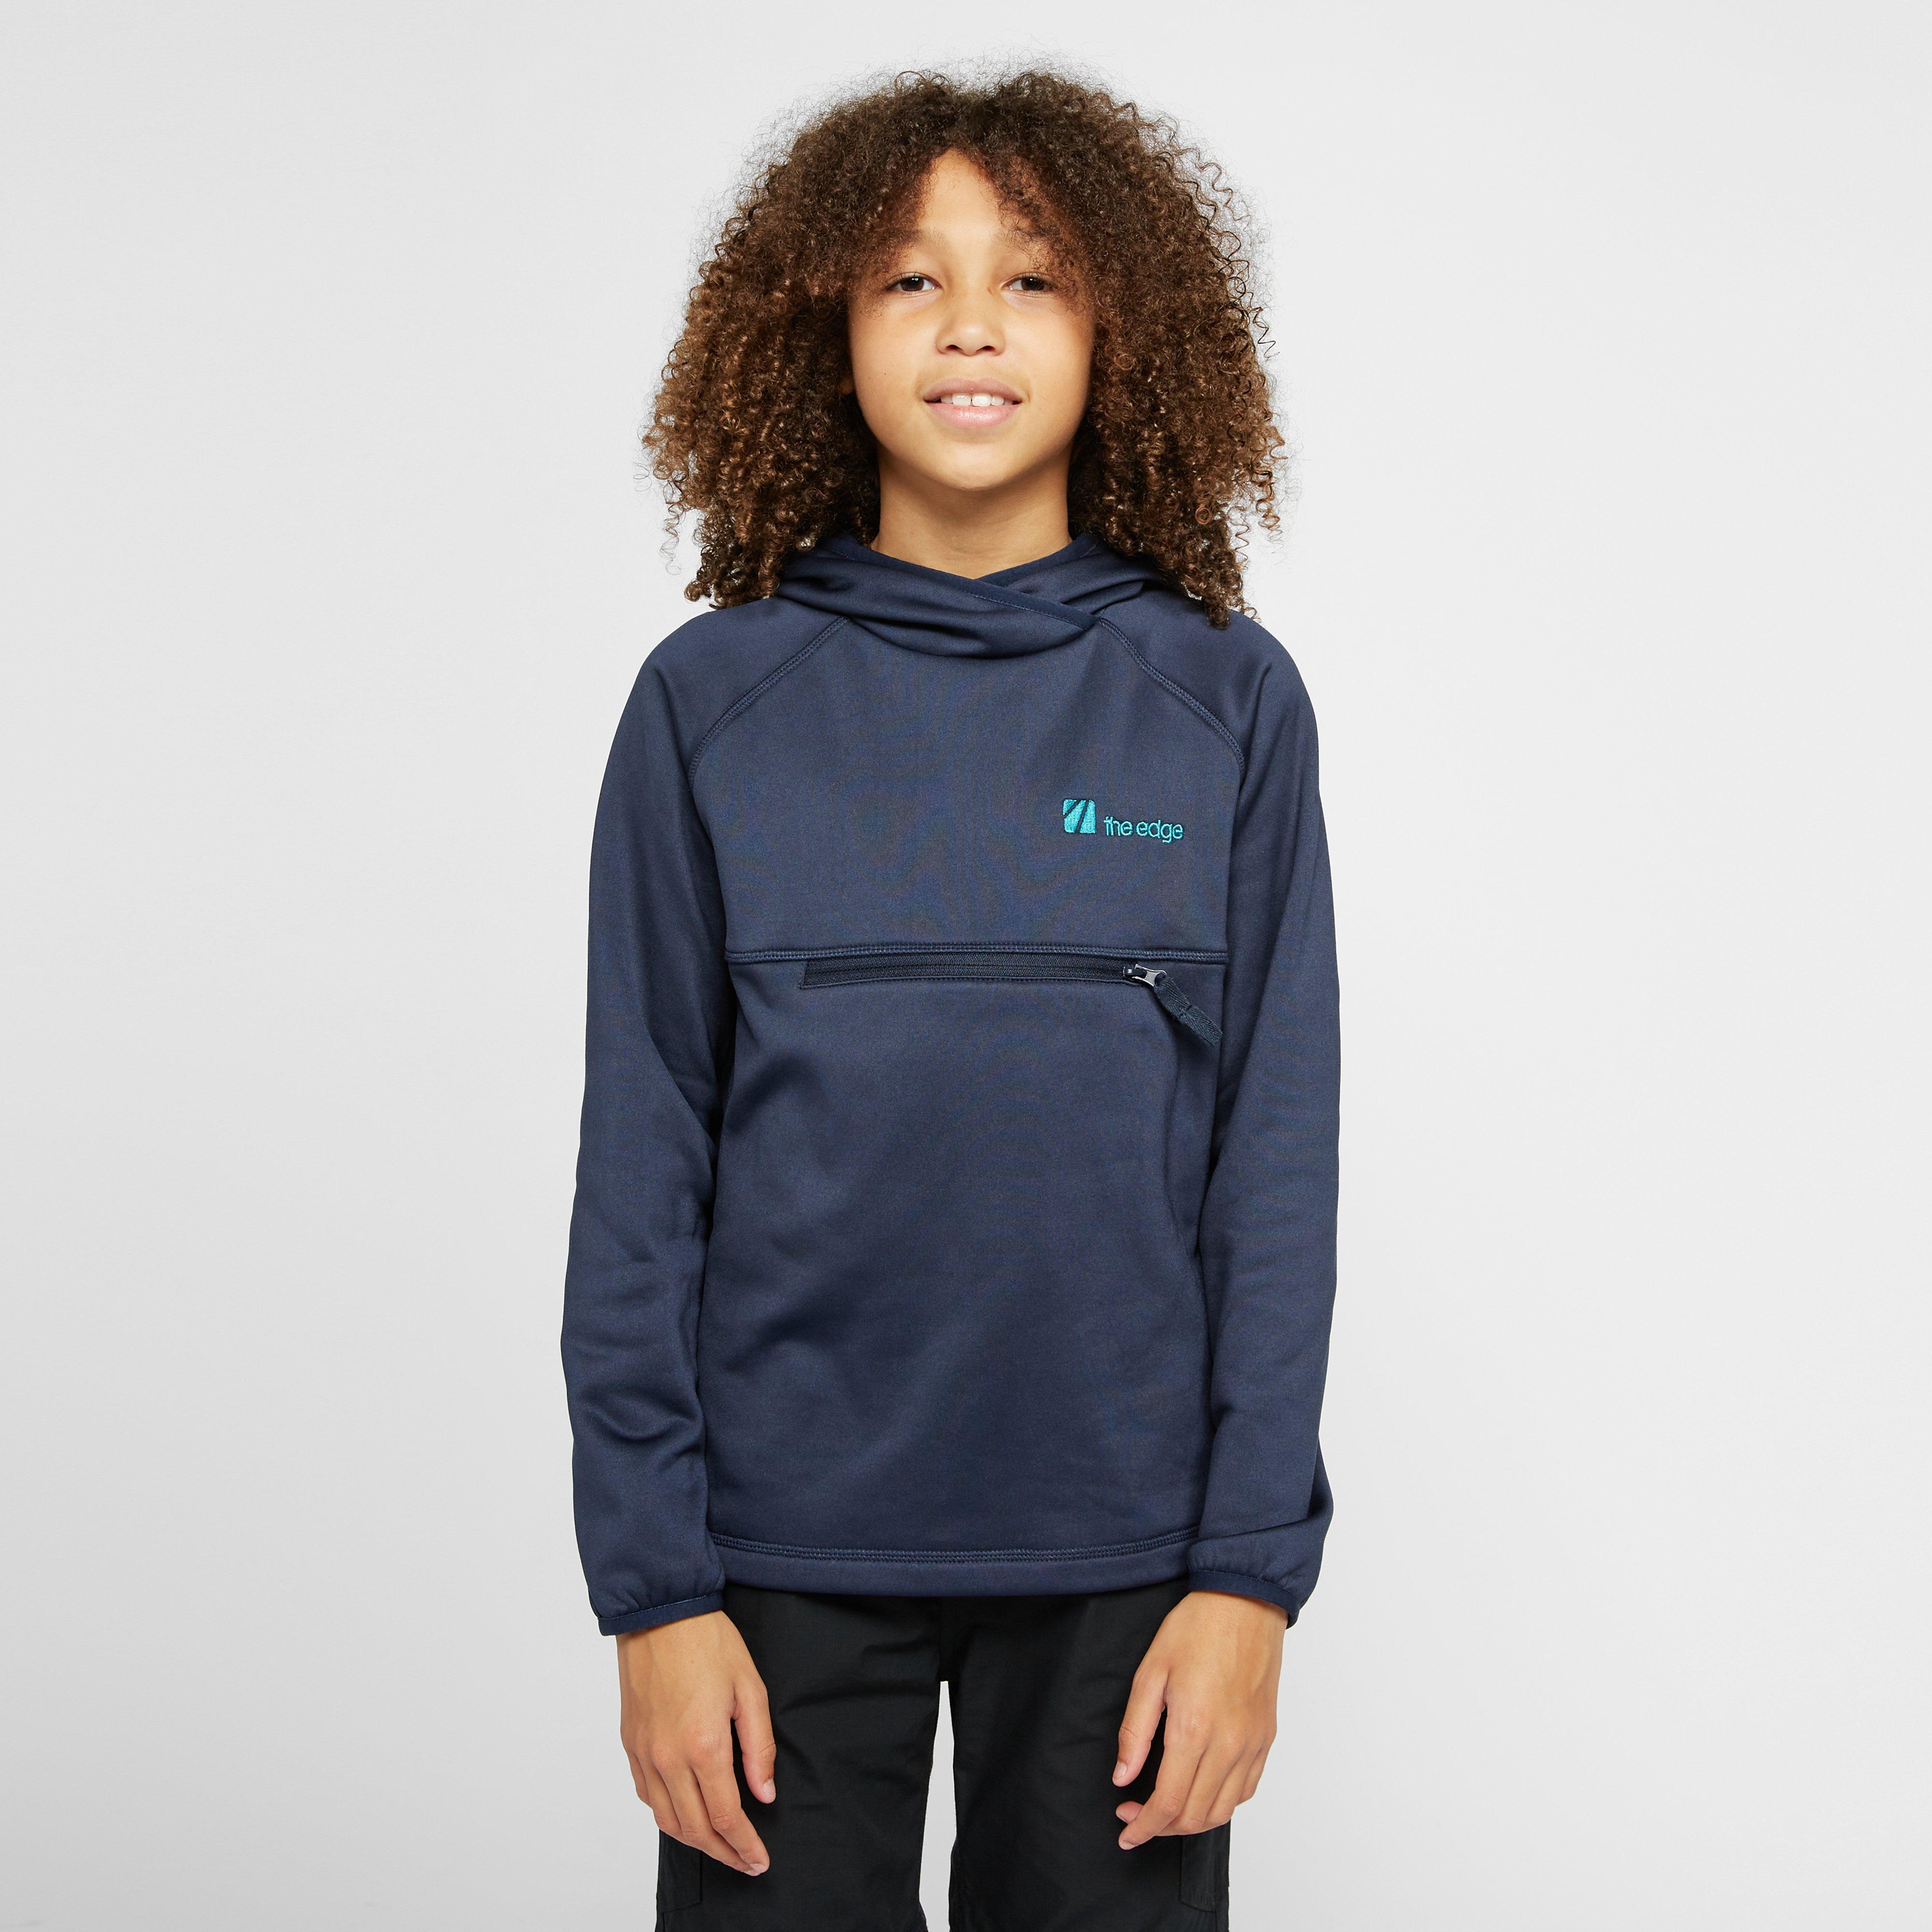 The Edge Kids Oth Hoodie - Navy/nvy  Navy/nvy